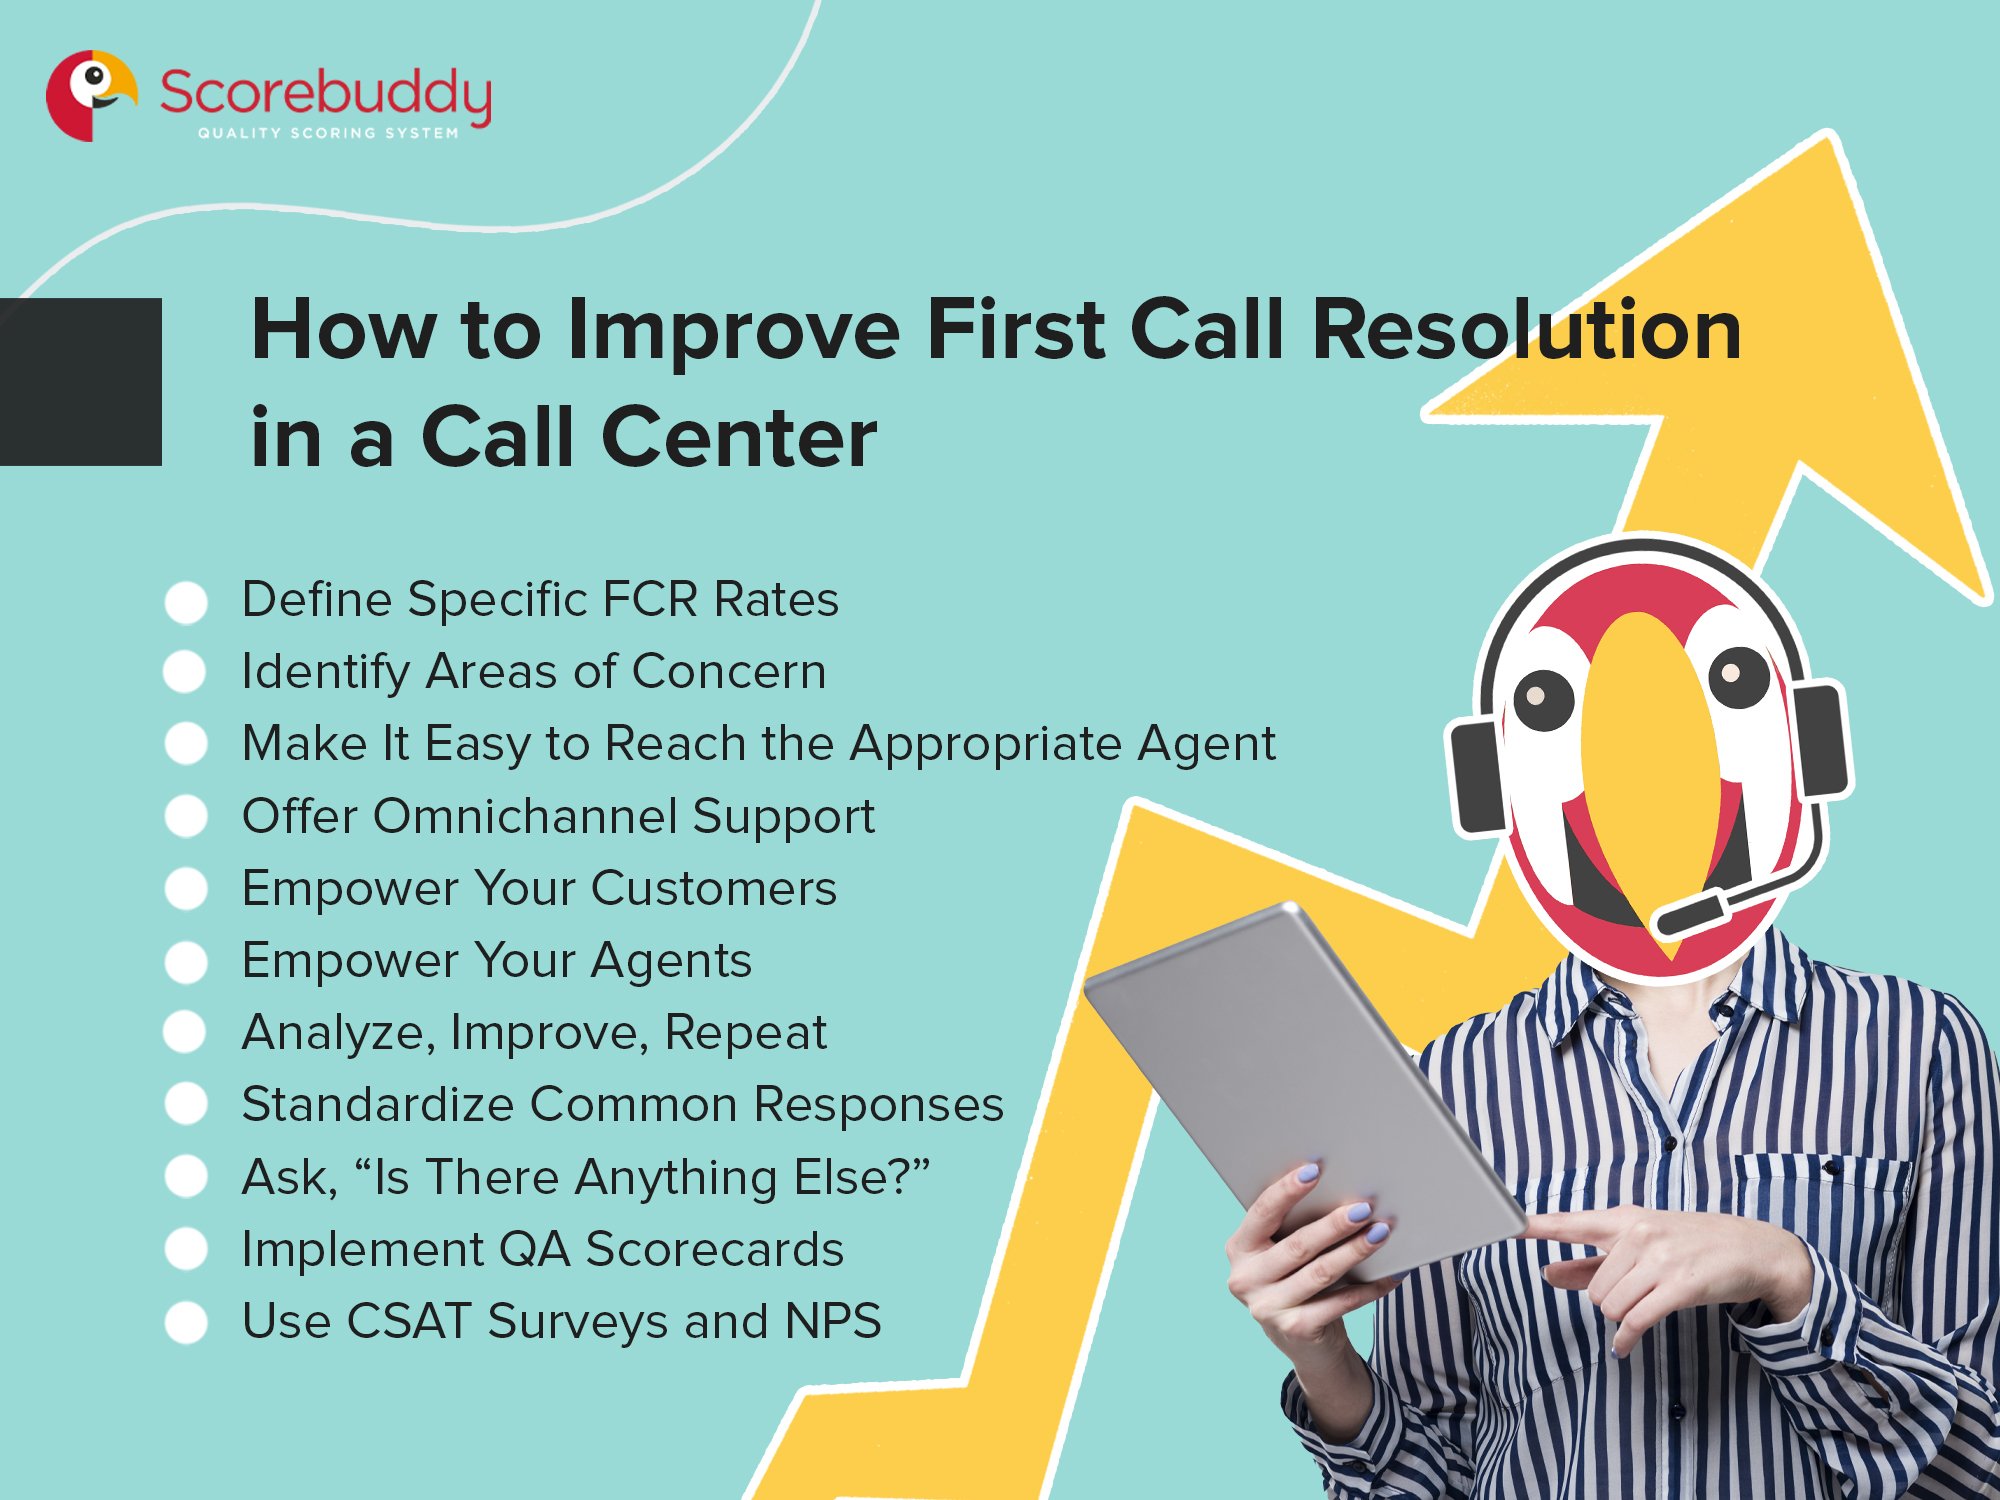 How to Improve First Call Resolution